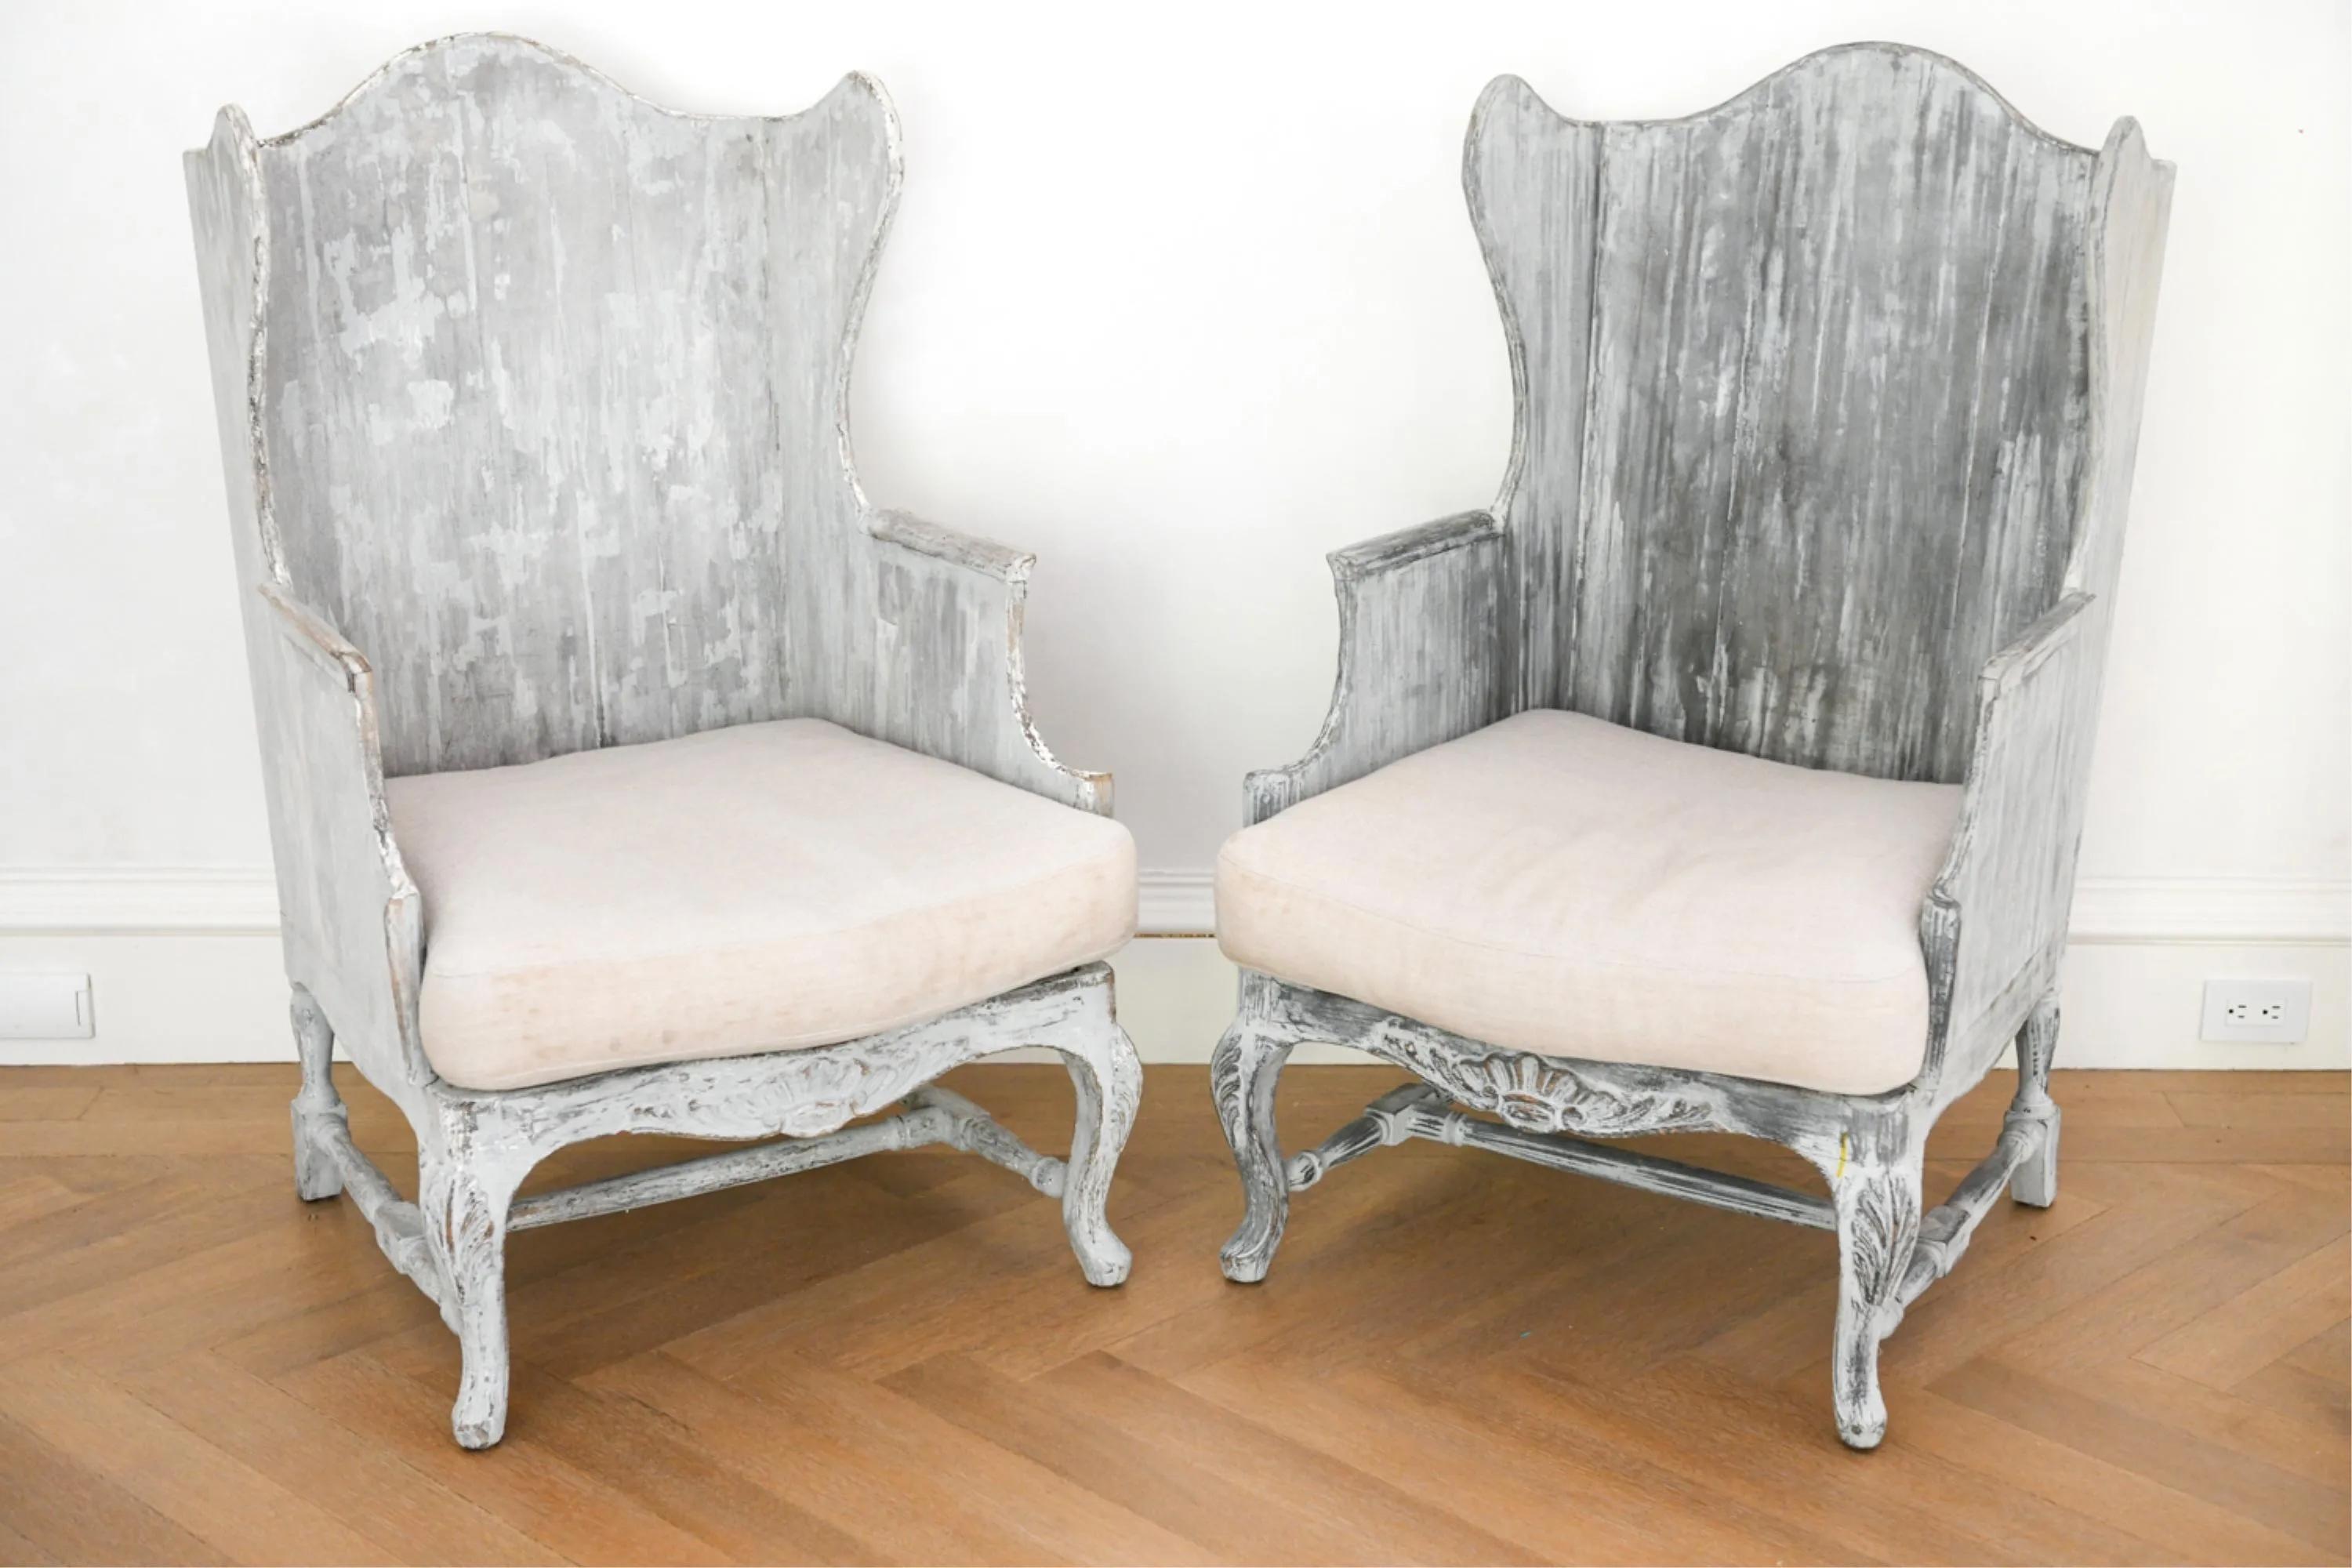 Pair of Impressive, highly stylish and unique Italian painted wood frame wing back arm chairs that will bring presence to any room. Chairs have a full wood frame and a loose cushion. The painted wood frame. is intentionally distressed. The cushions